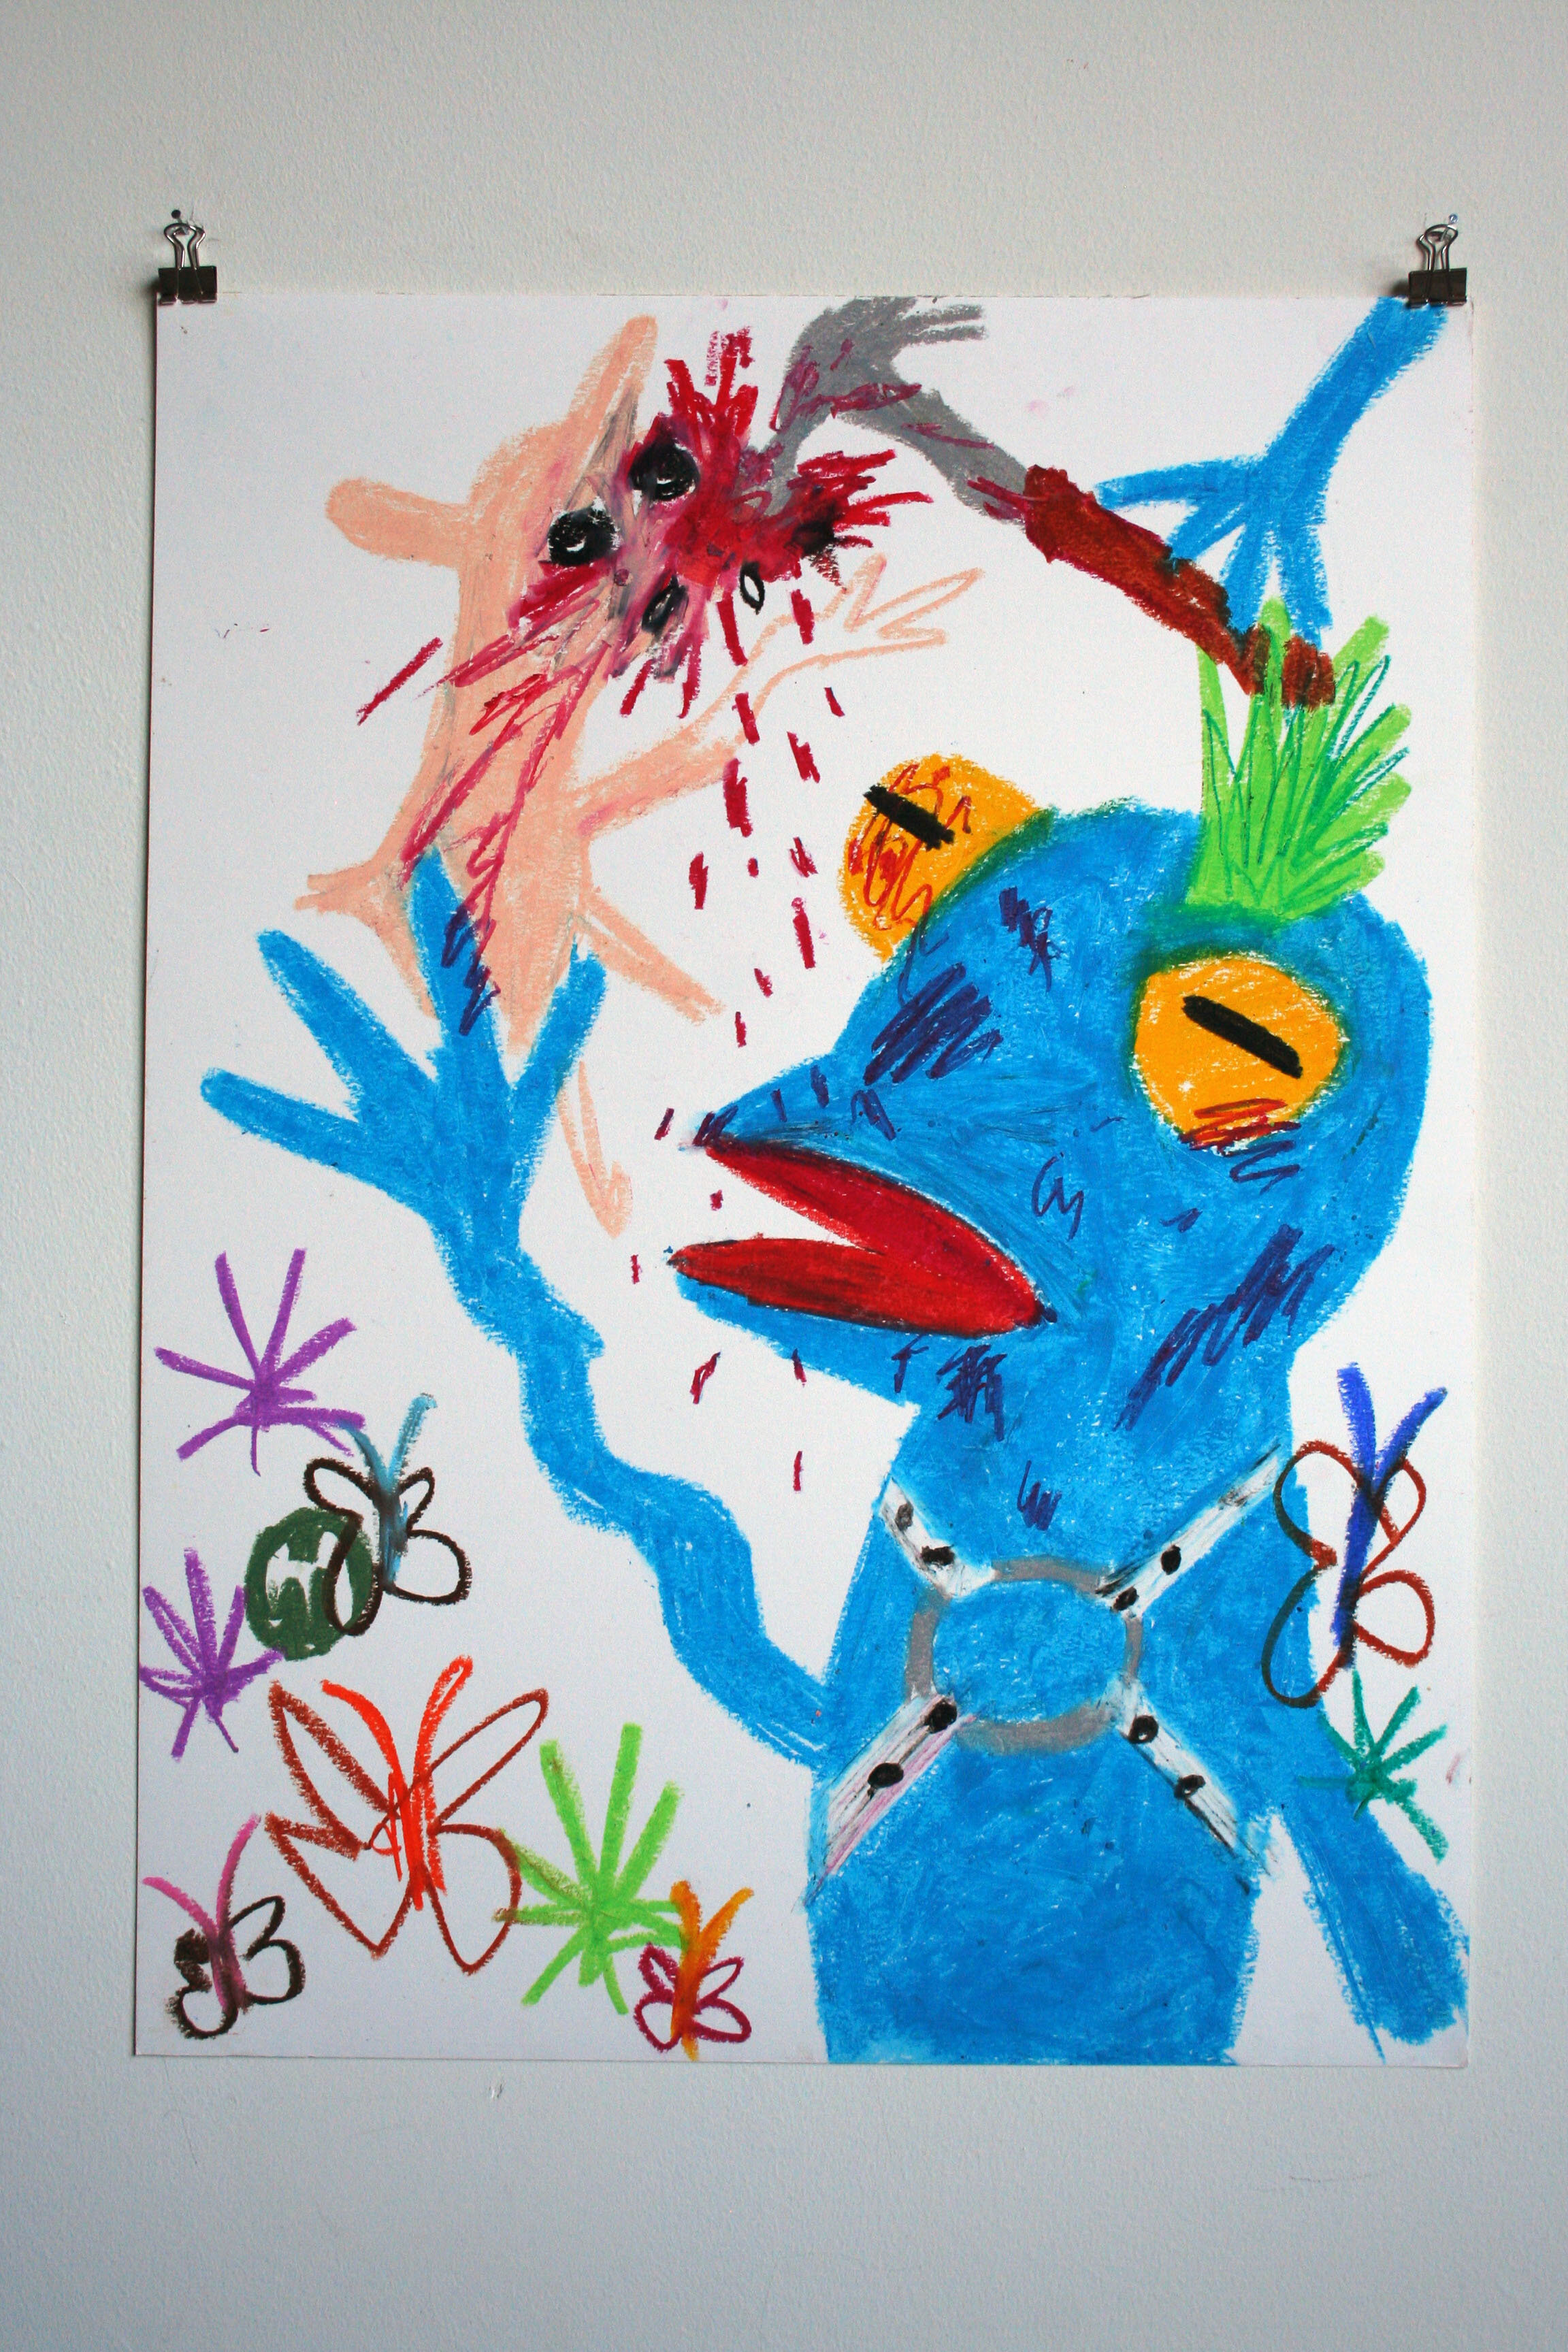   What is That Puppet Doing?,  2014  24 x 18 inches (60.96 x 45.72 cm.)  Oil pastel on paper 